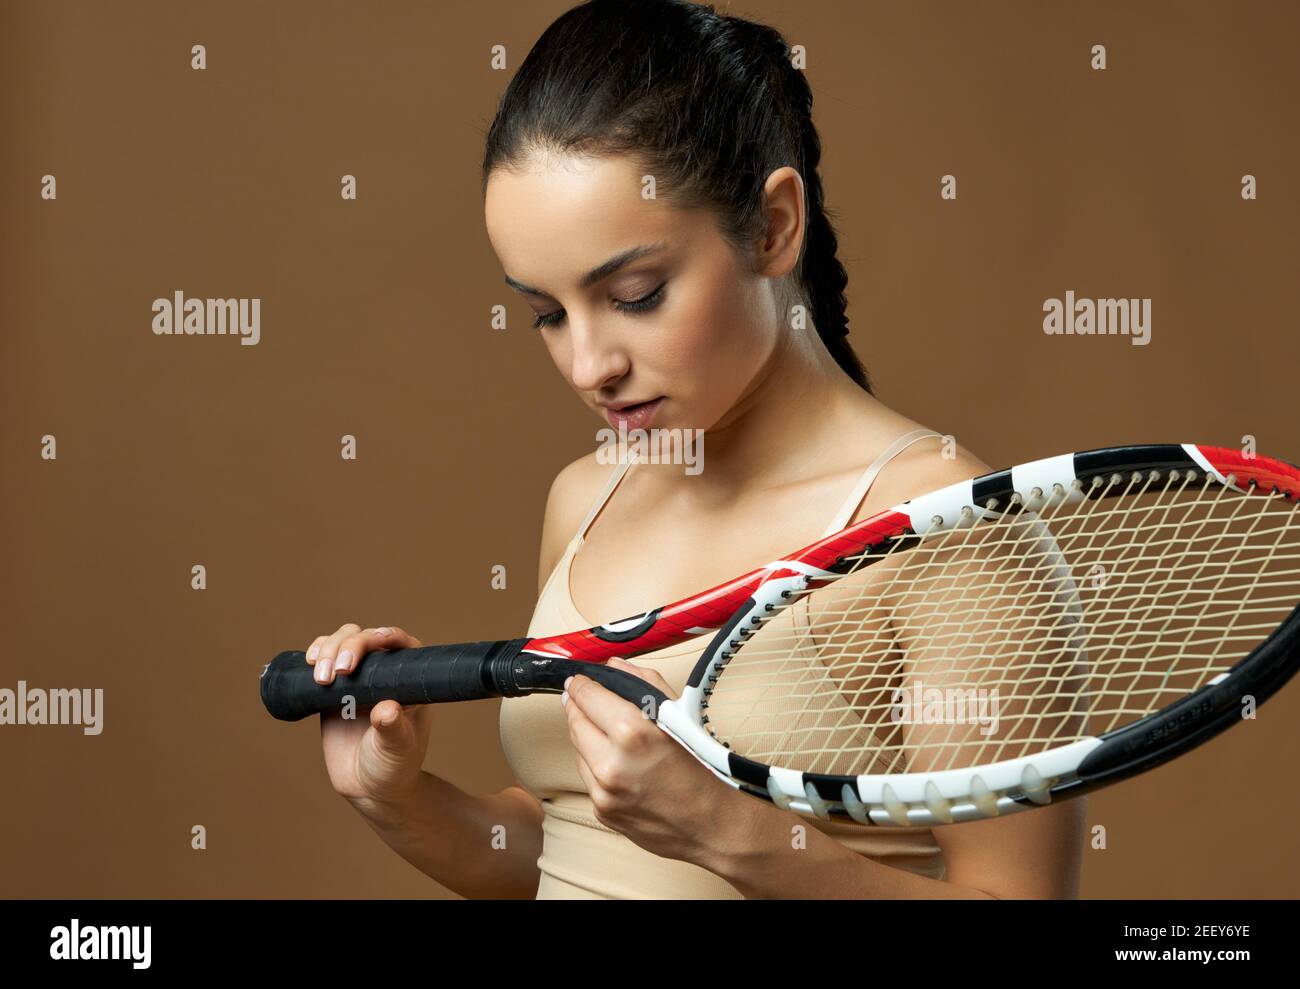 Attractive brunette lady looking at tennis racket in her hands with serious expression. Isolated on beige background Stock Photo